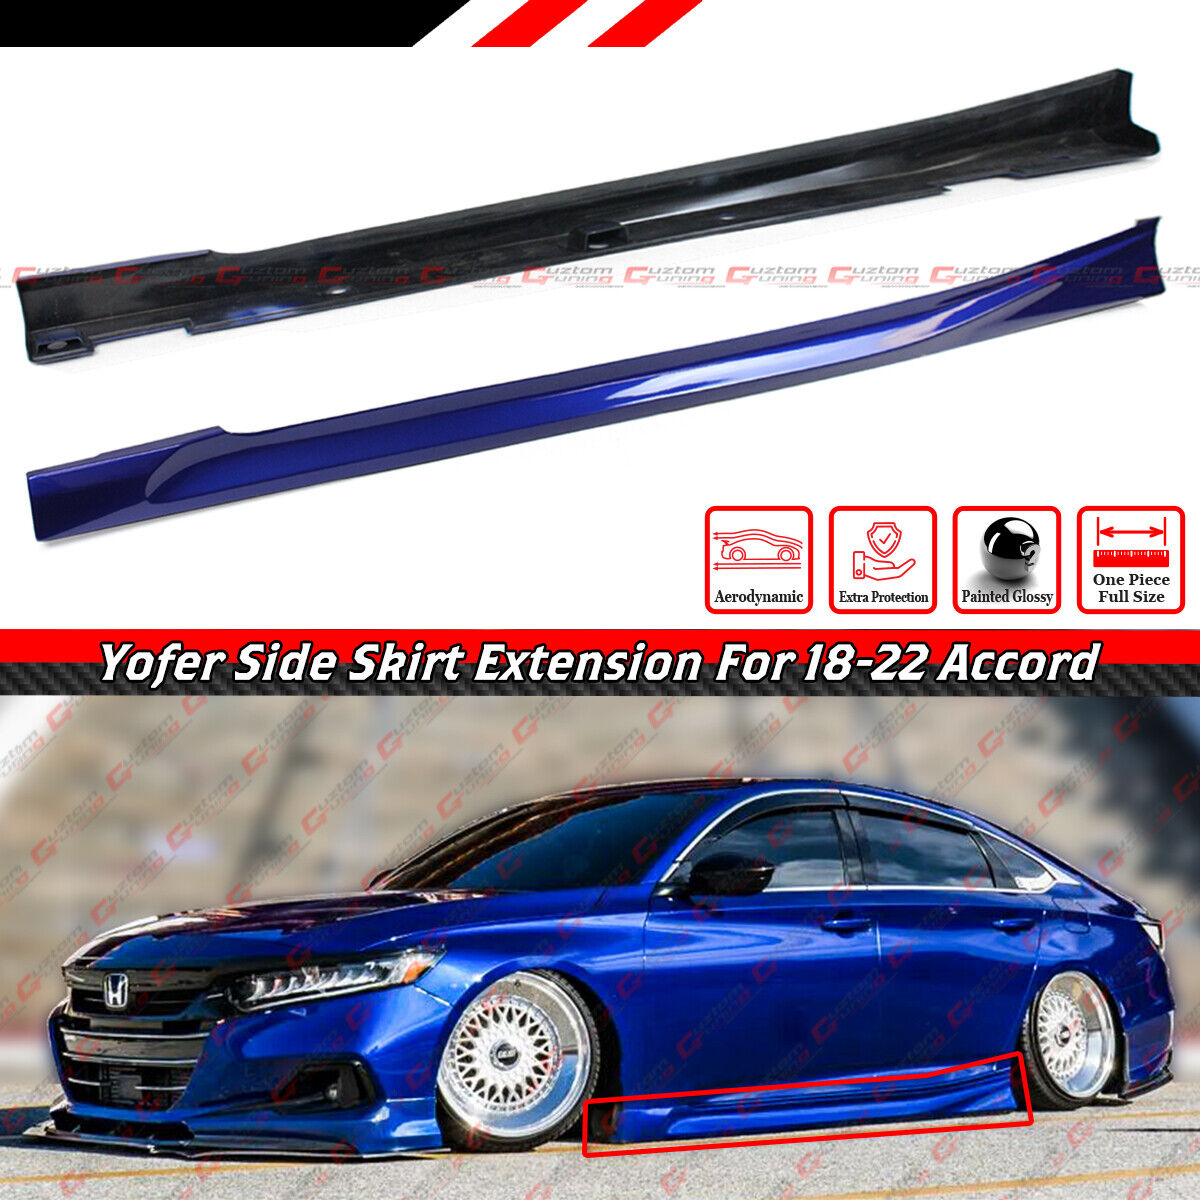 For 18-22 Honda Accord Yofer Still Night Pearl Blue Add-on Side Skirt Extensions